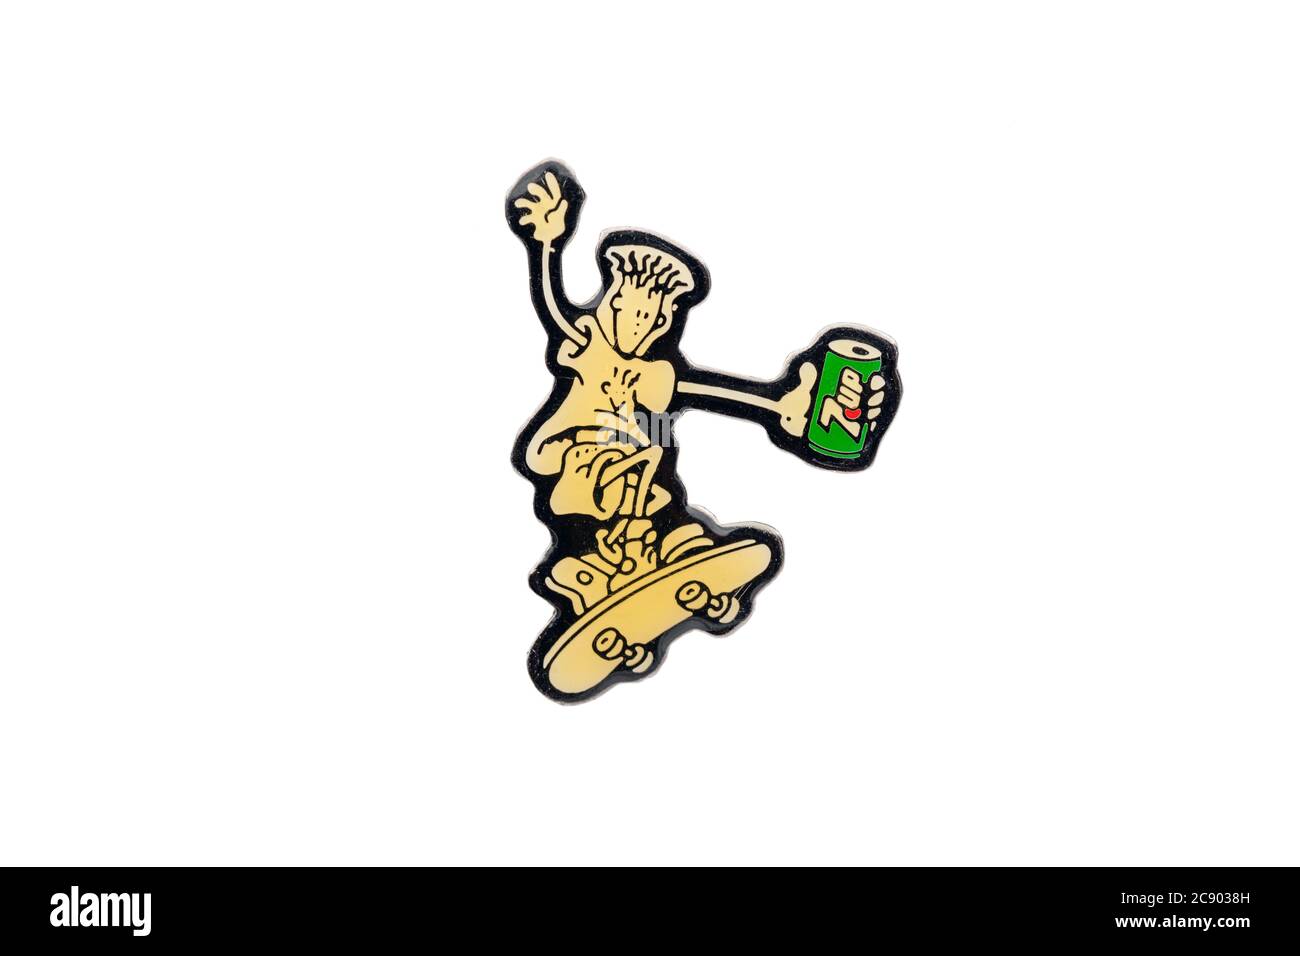 Enamel pin of a character skateboarding named Fido Dido, mascot of the 7 up  brand. Lapel pin isolated on white background Stock Photo - Alamy